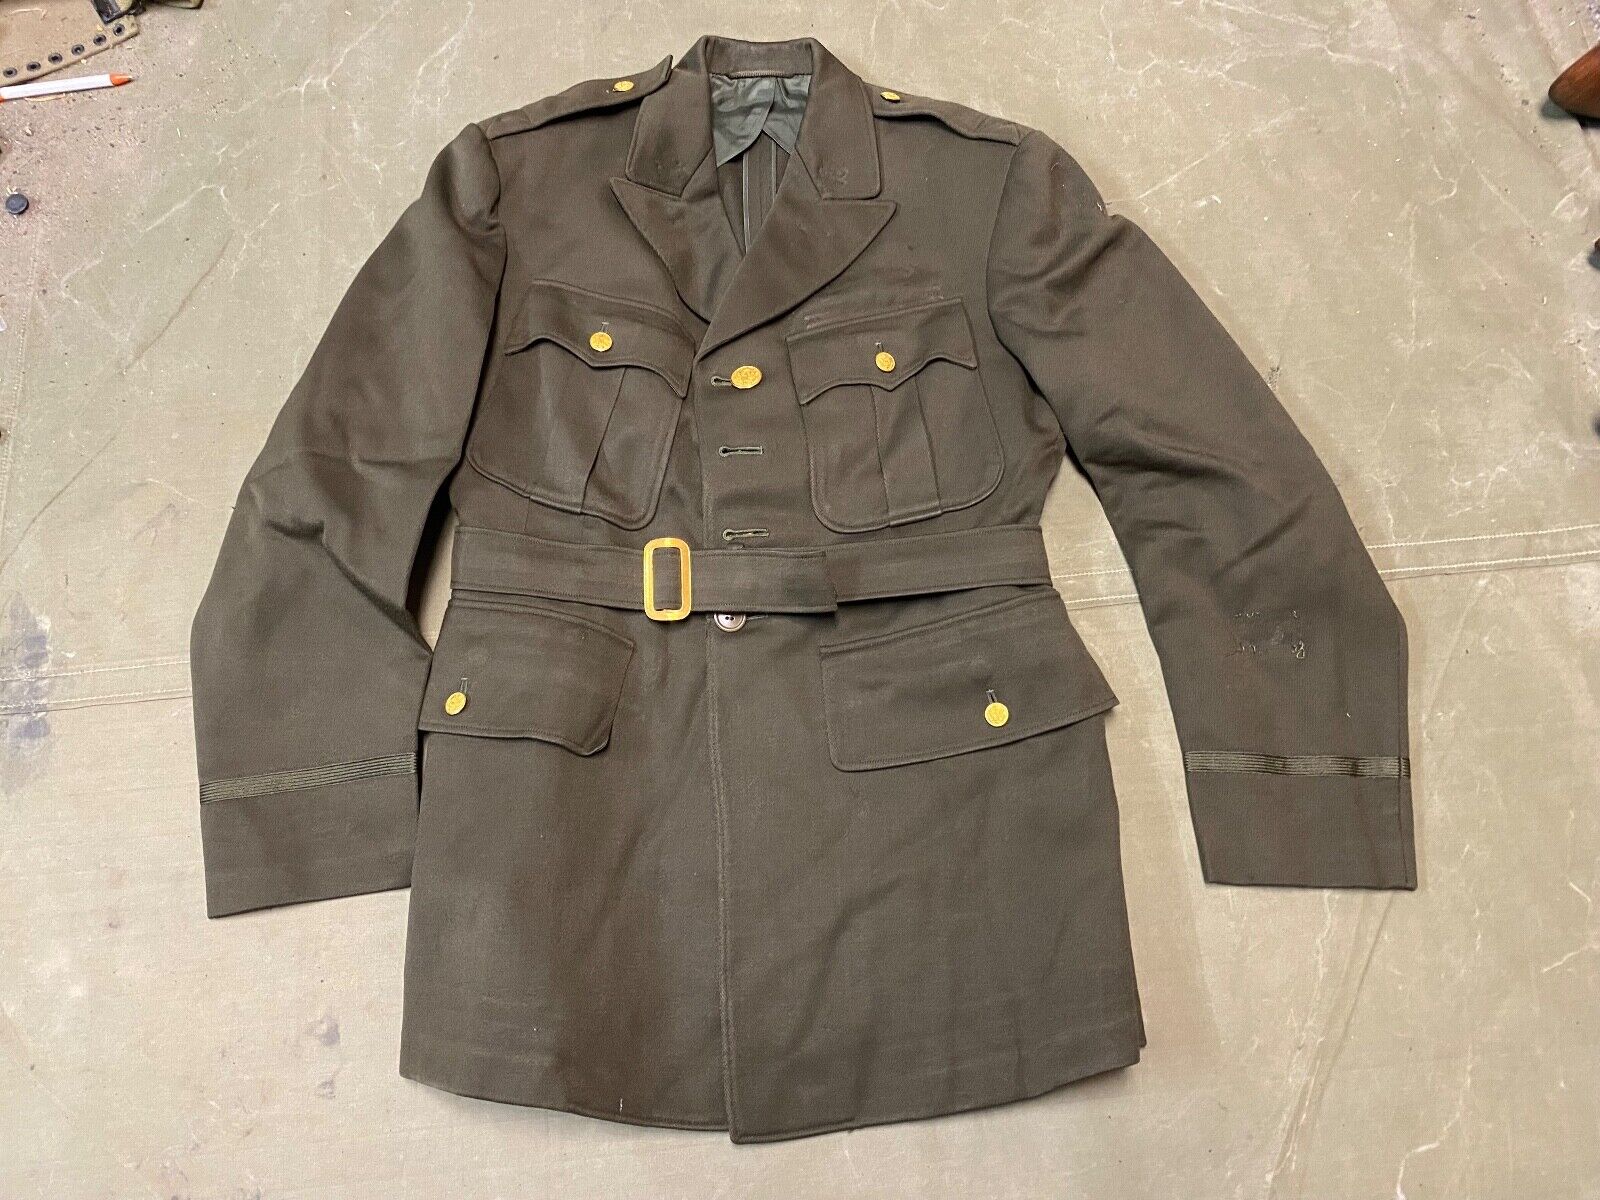 ORIGINAL WWII US ARMY OFFICER CLASS A DRESS JACKET- SMALL 38R